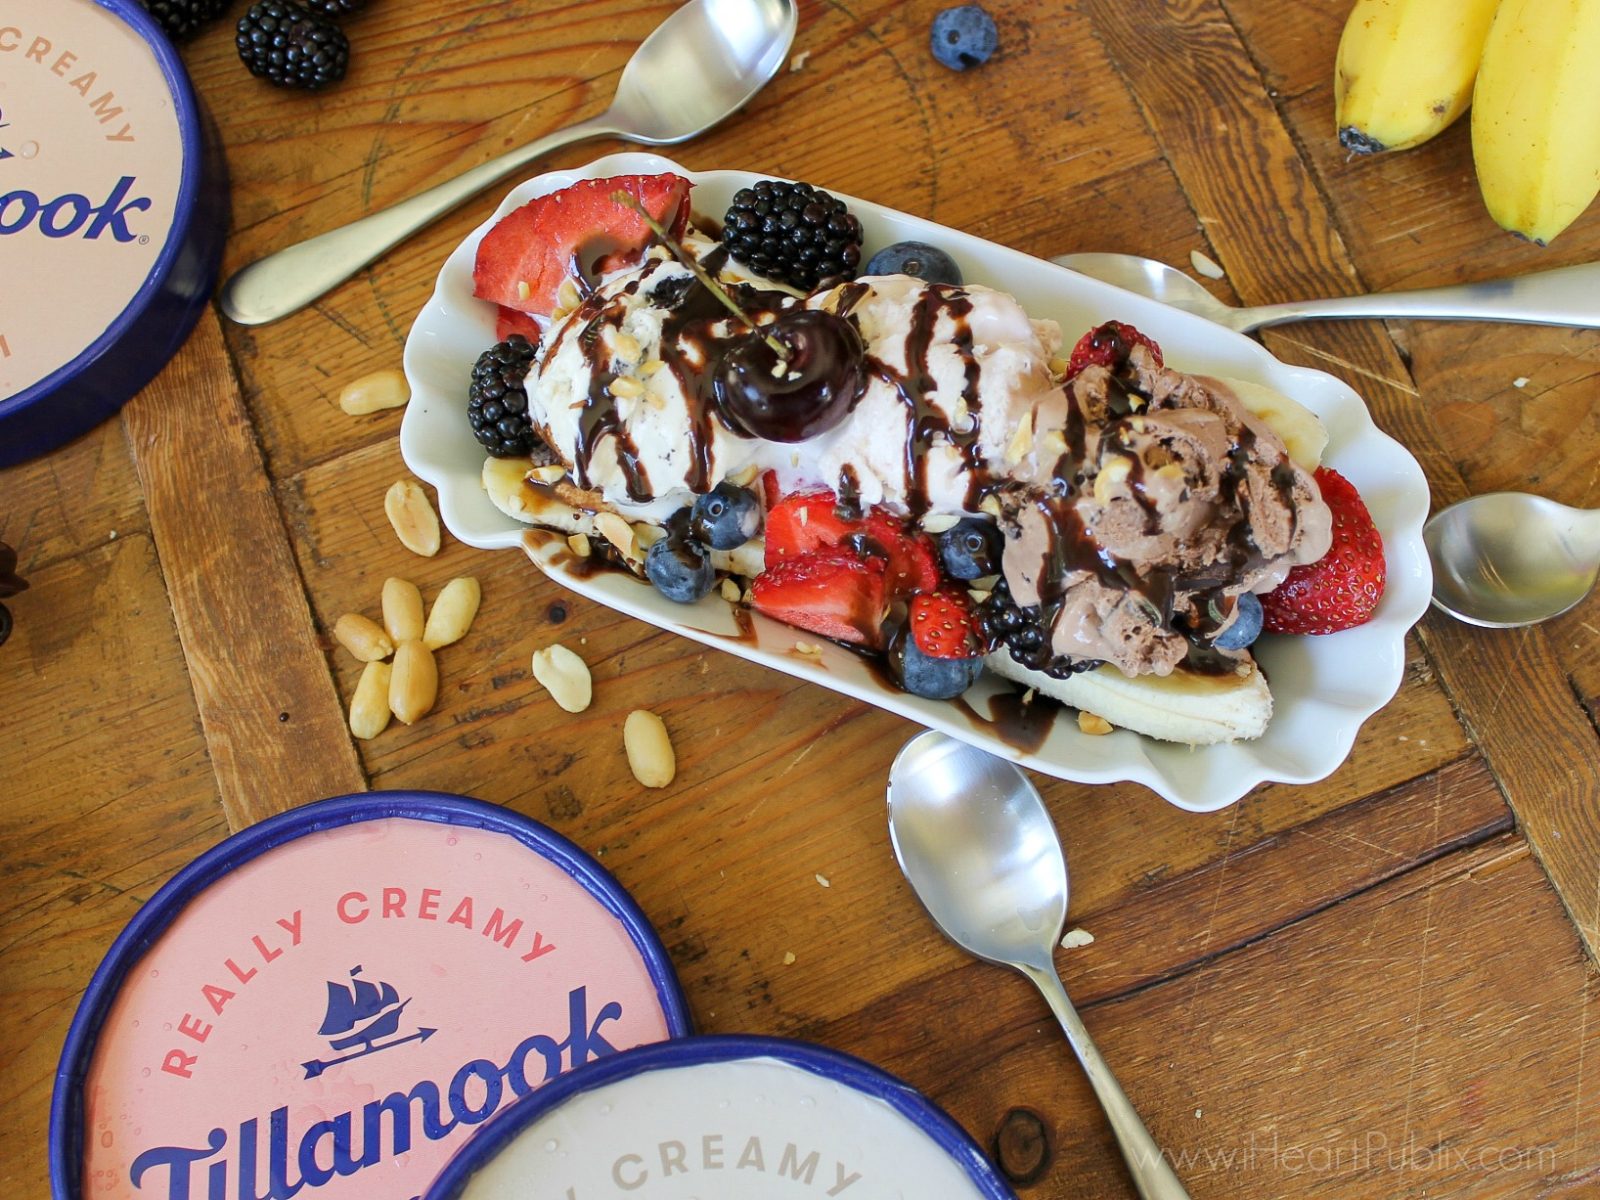 Save $1.50 On Tillamook Ice Cream At Publix – Find Your Favorite Flavors, Made Better